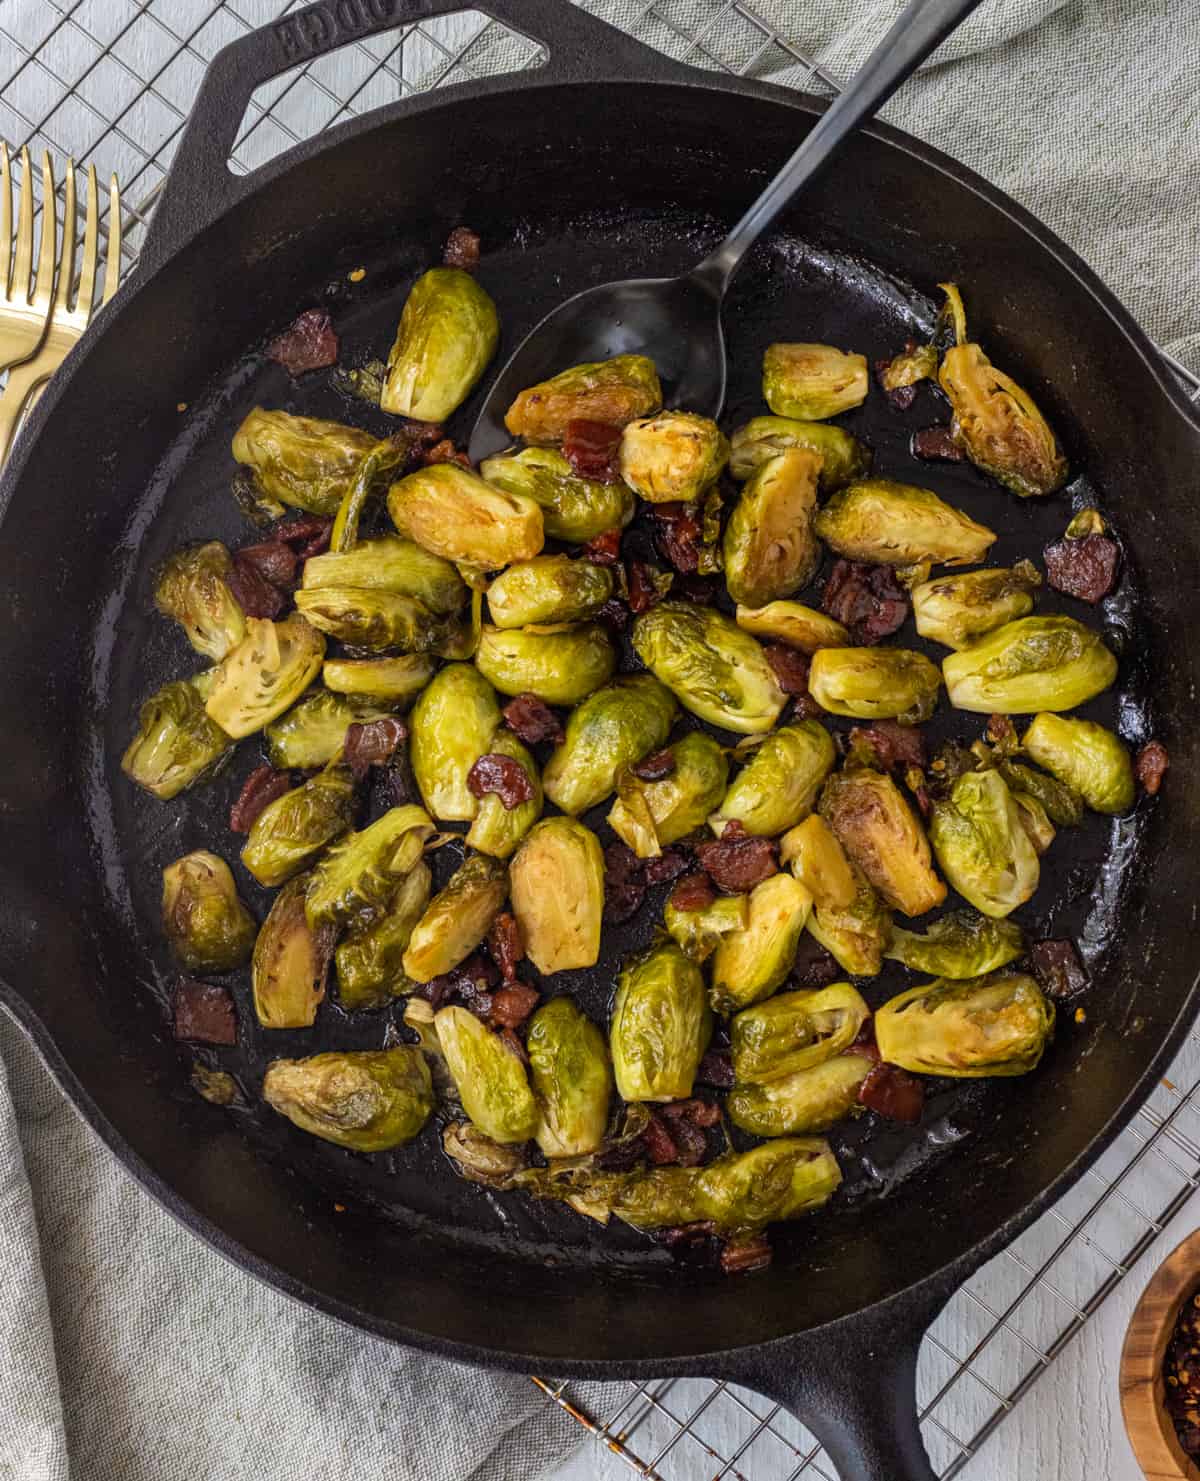 Caramelized Brussels sprouts and bacon in a cast iron skillet with a large spoon on top of a wire rack and towel with forks on the side.